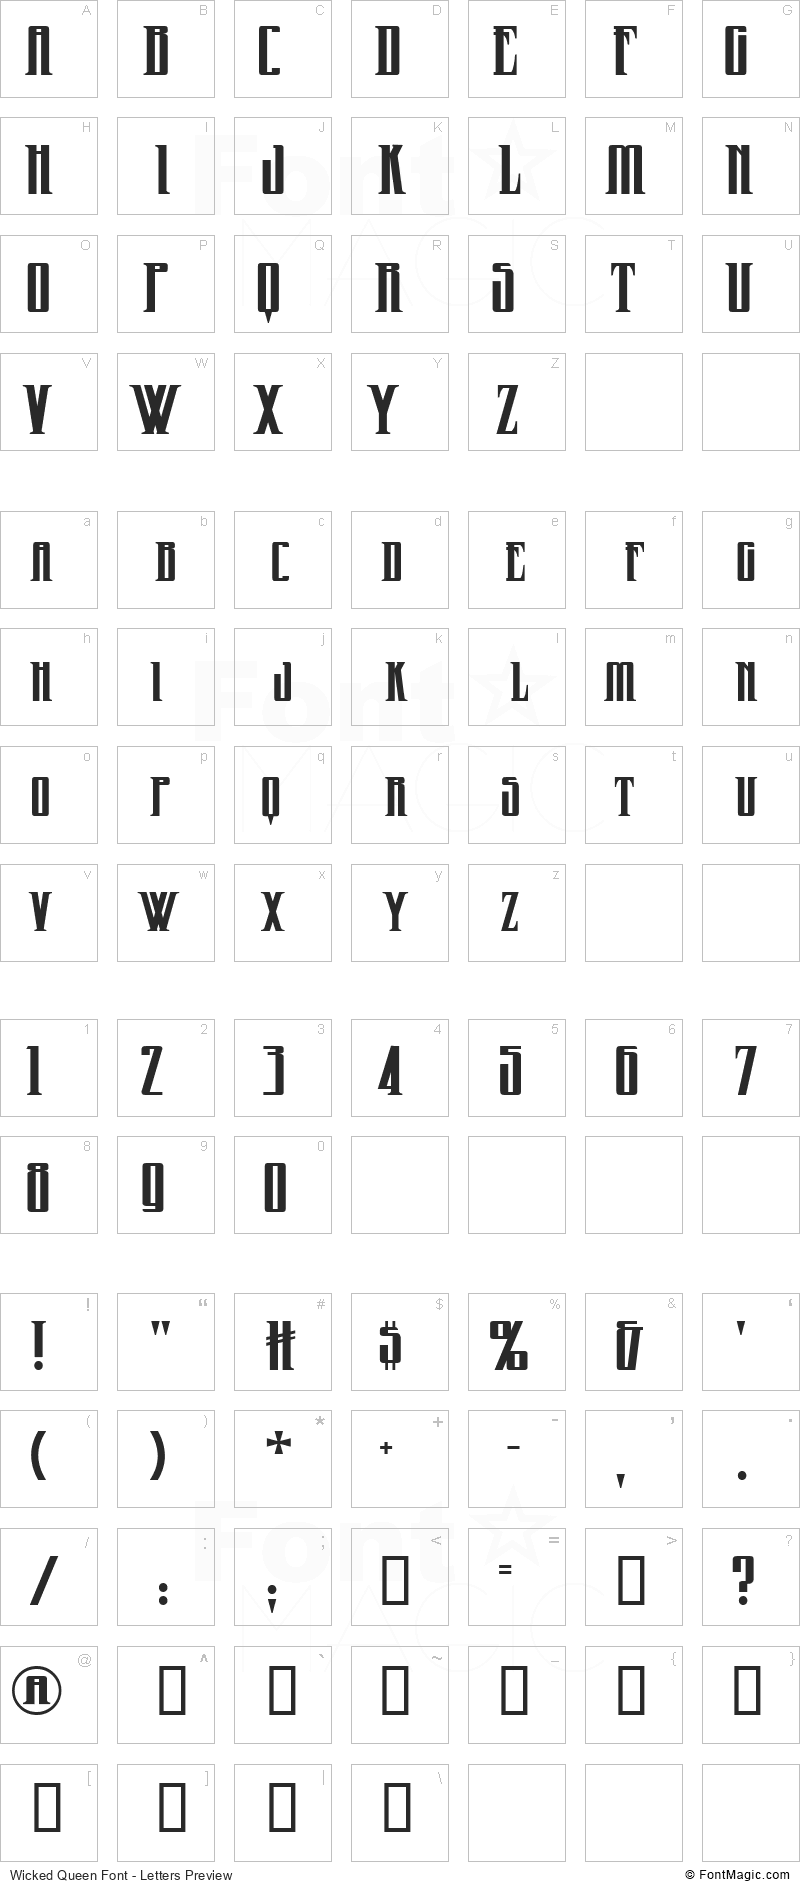 Wicked Queen Font - All Latters Preview Chart